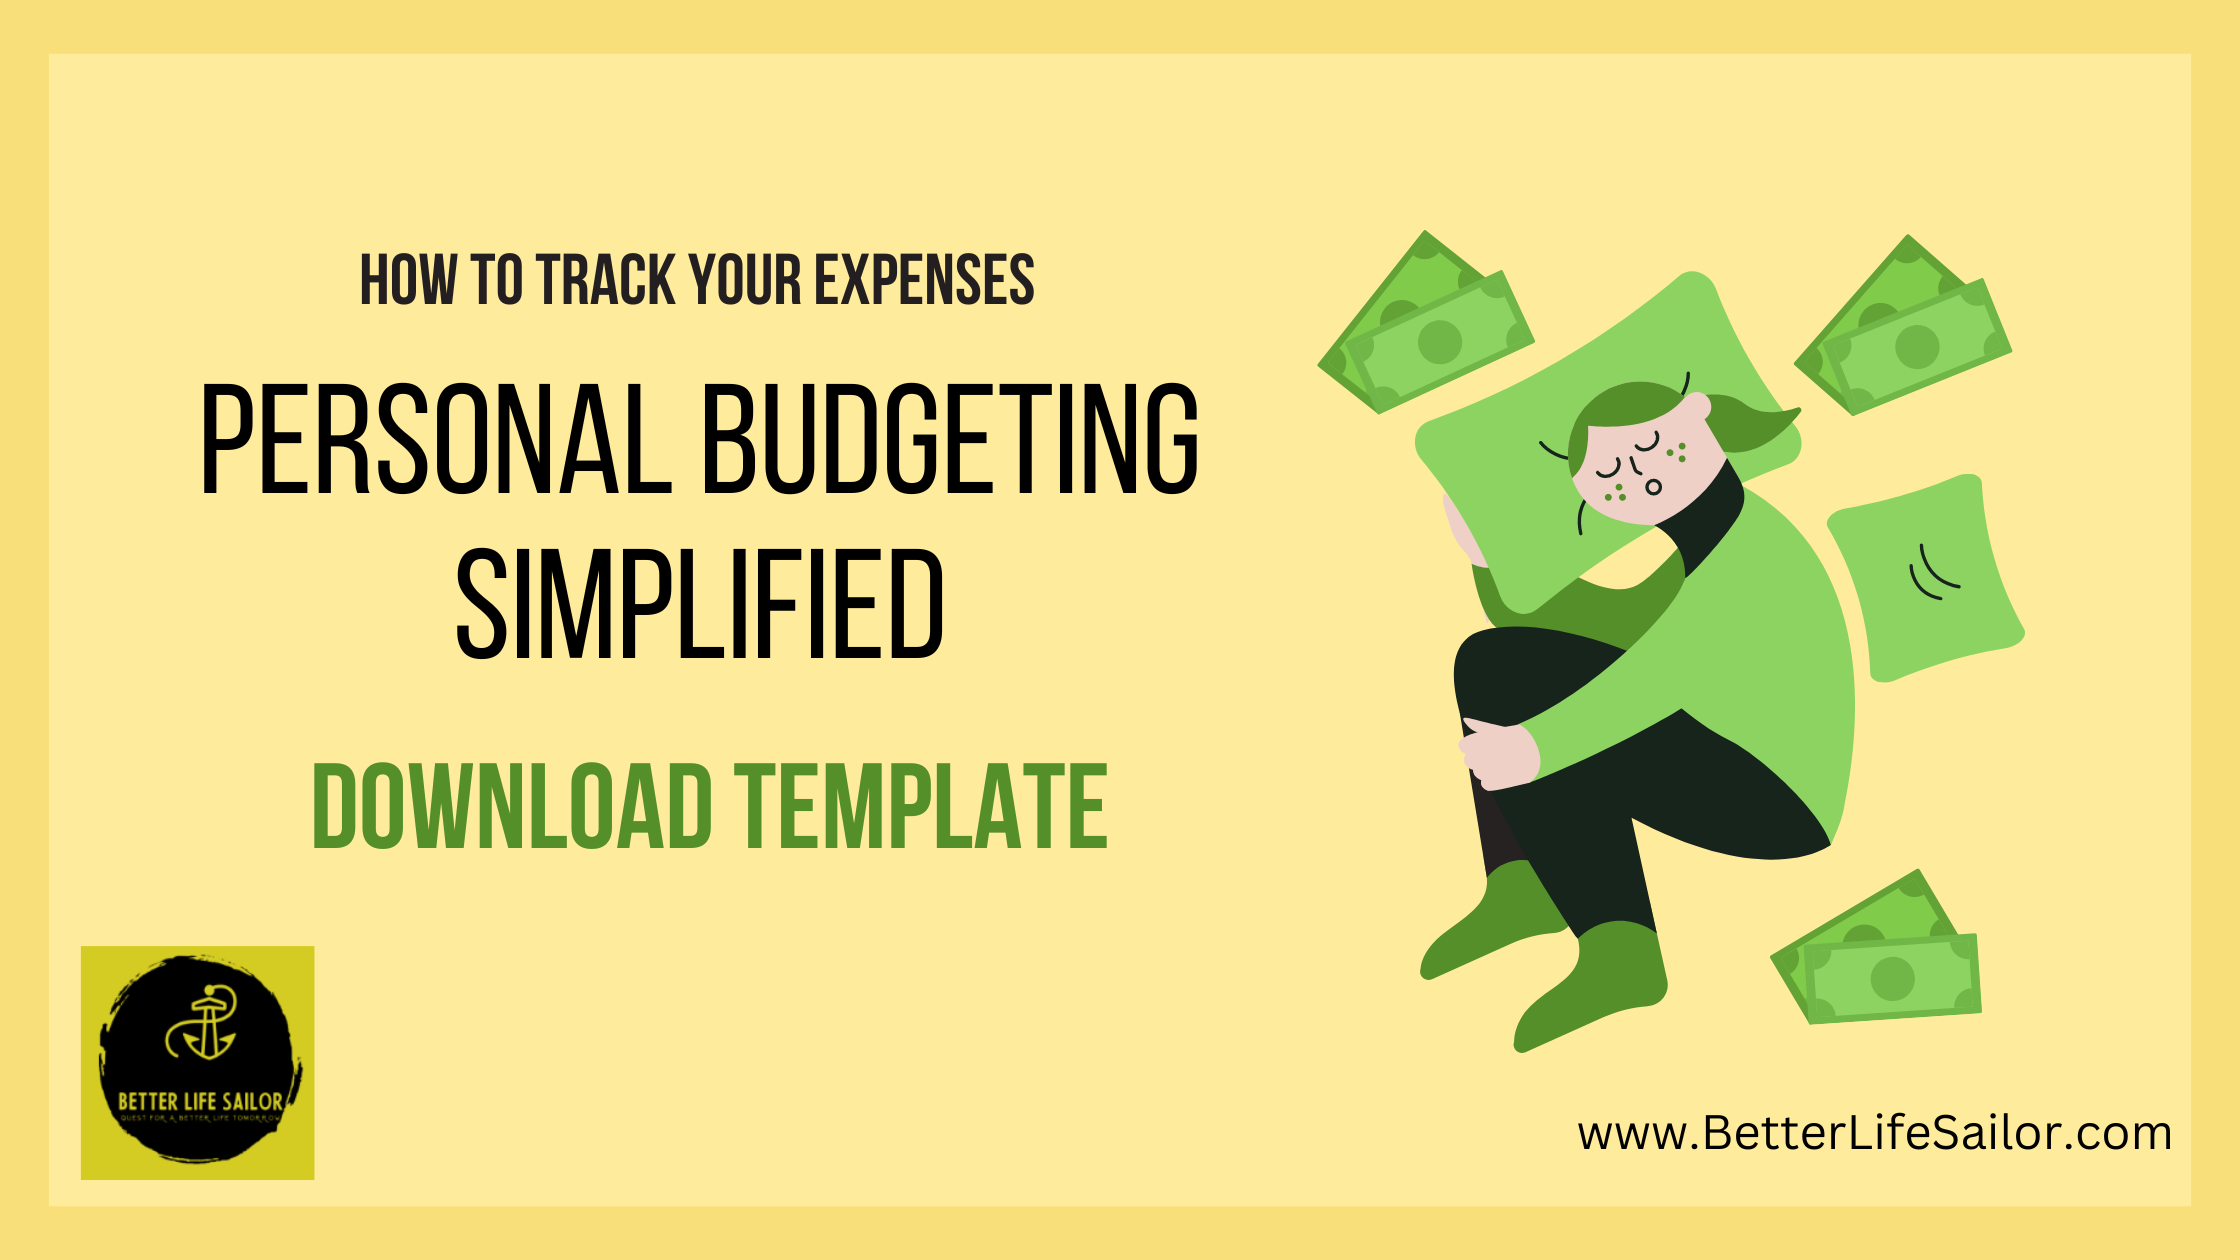 How to track your expenses?